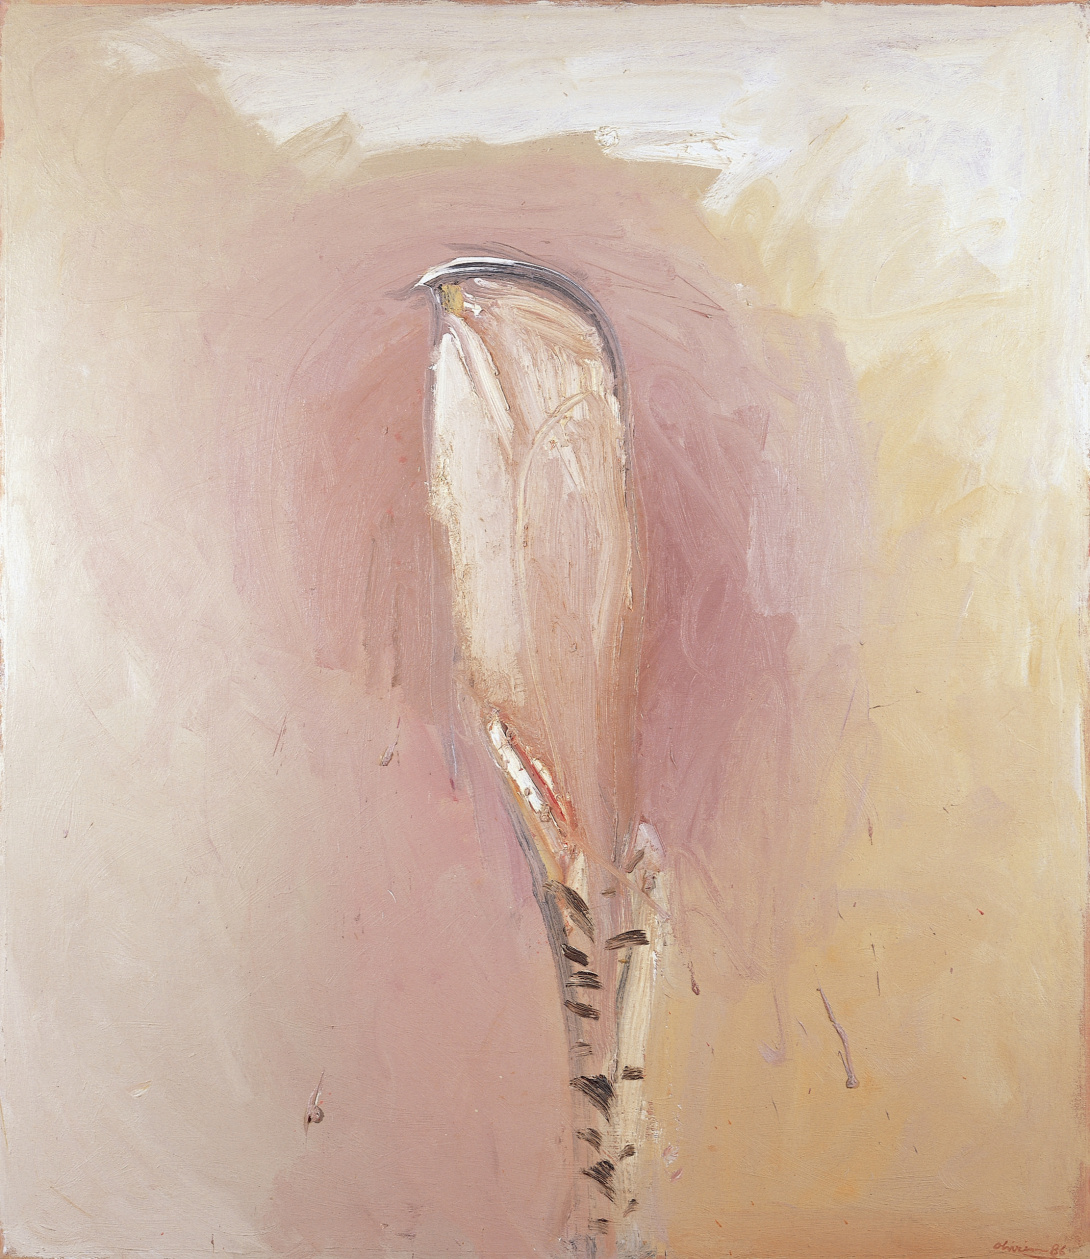 An abstract pink and yellow painting. At the center of the image is a graceful white swoop which comes to a grey and yellow point. A soft pink glow draws your attention back to the central shape until you notice the many layers of paint slowly alluding into a bird.